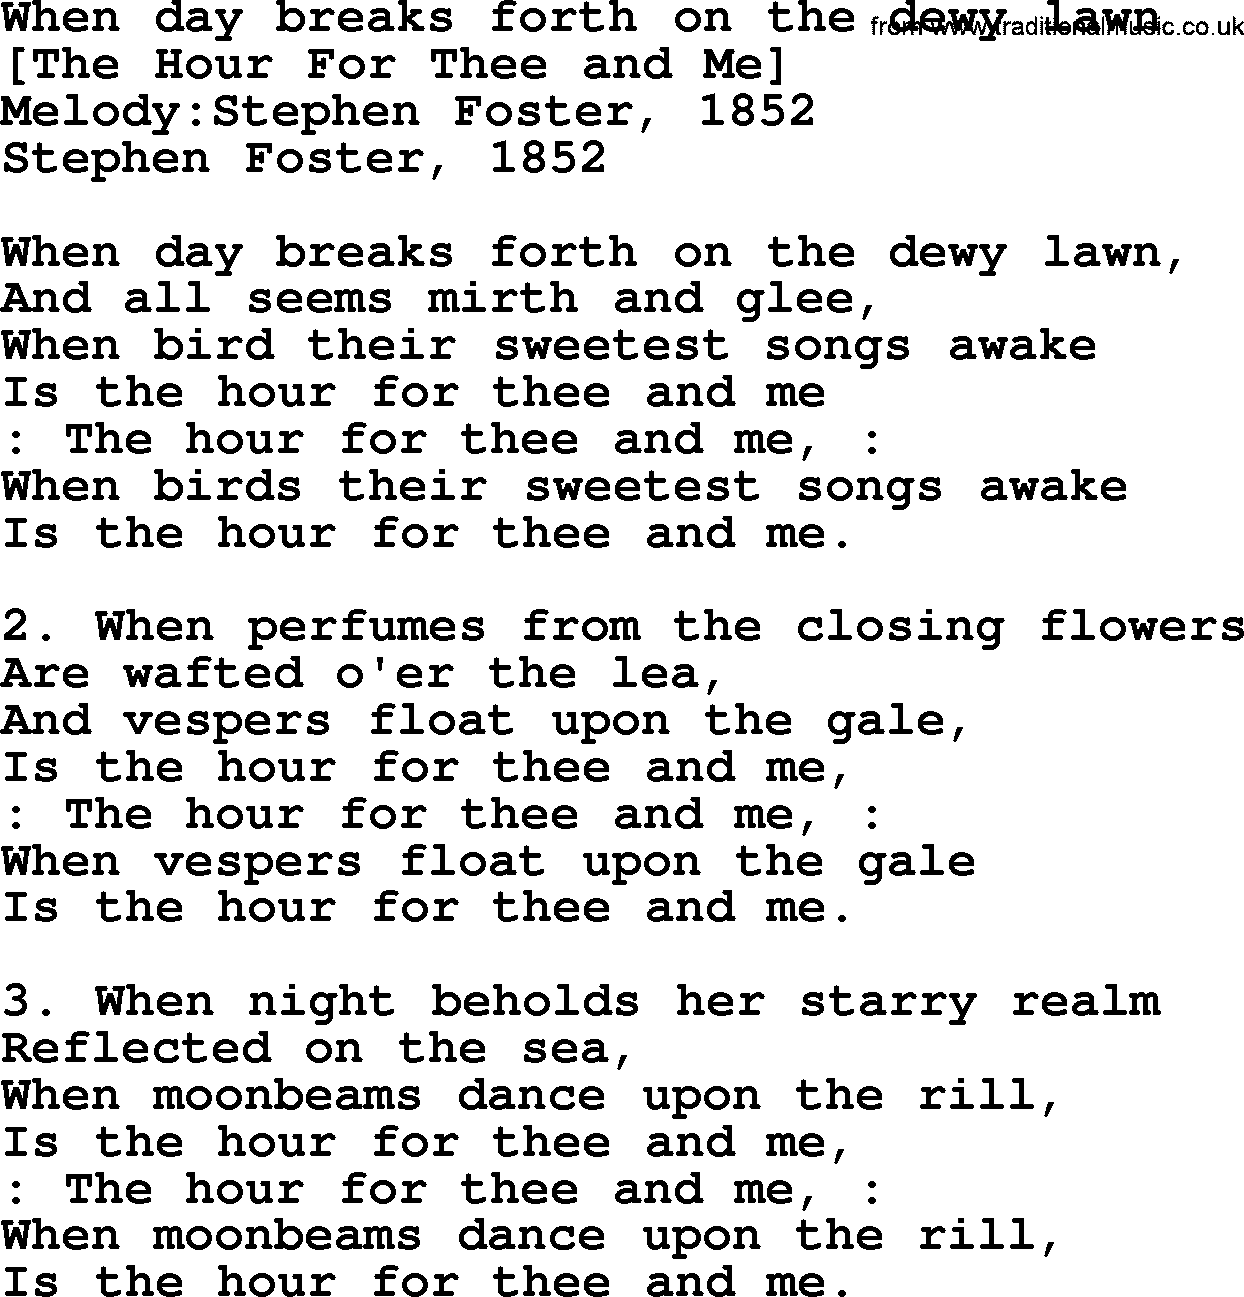 Old American Song: When Day Breaks Forth On The Dewy Lawn, lyrics